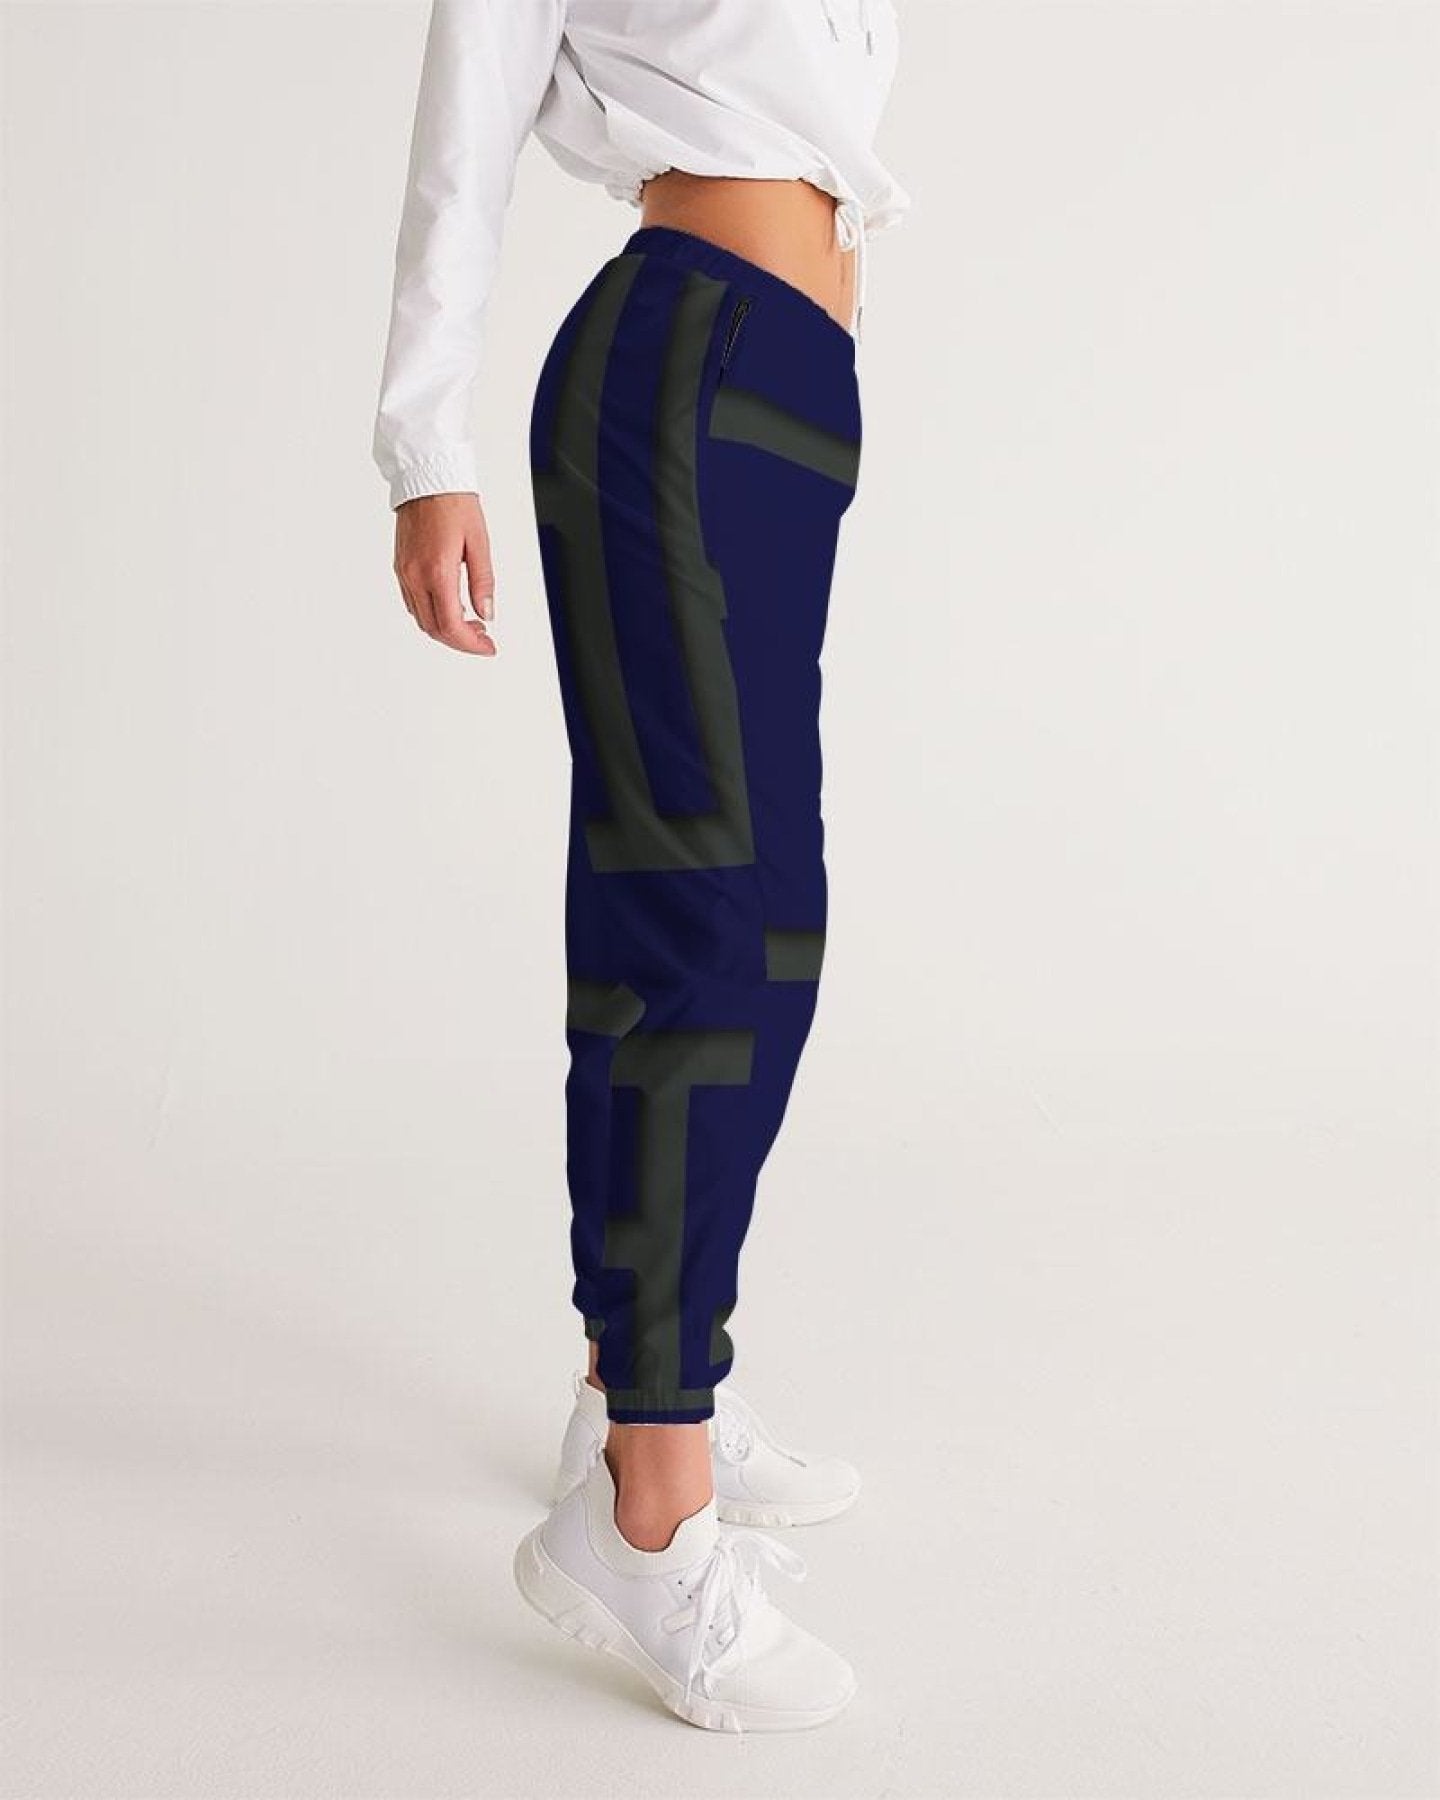 Womens Track Pants - Blue & Green Geometric Graphic Sports Pants - Scarvesnthangs